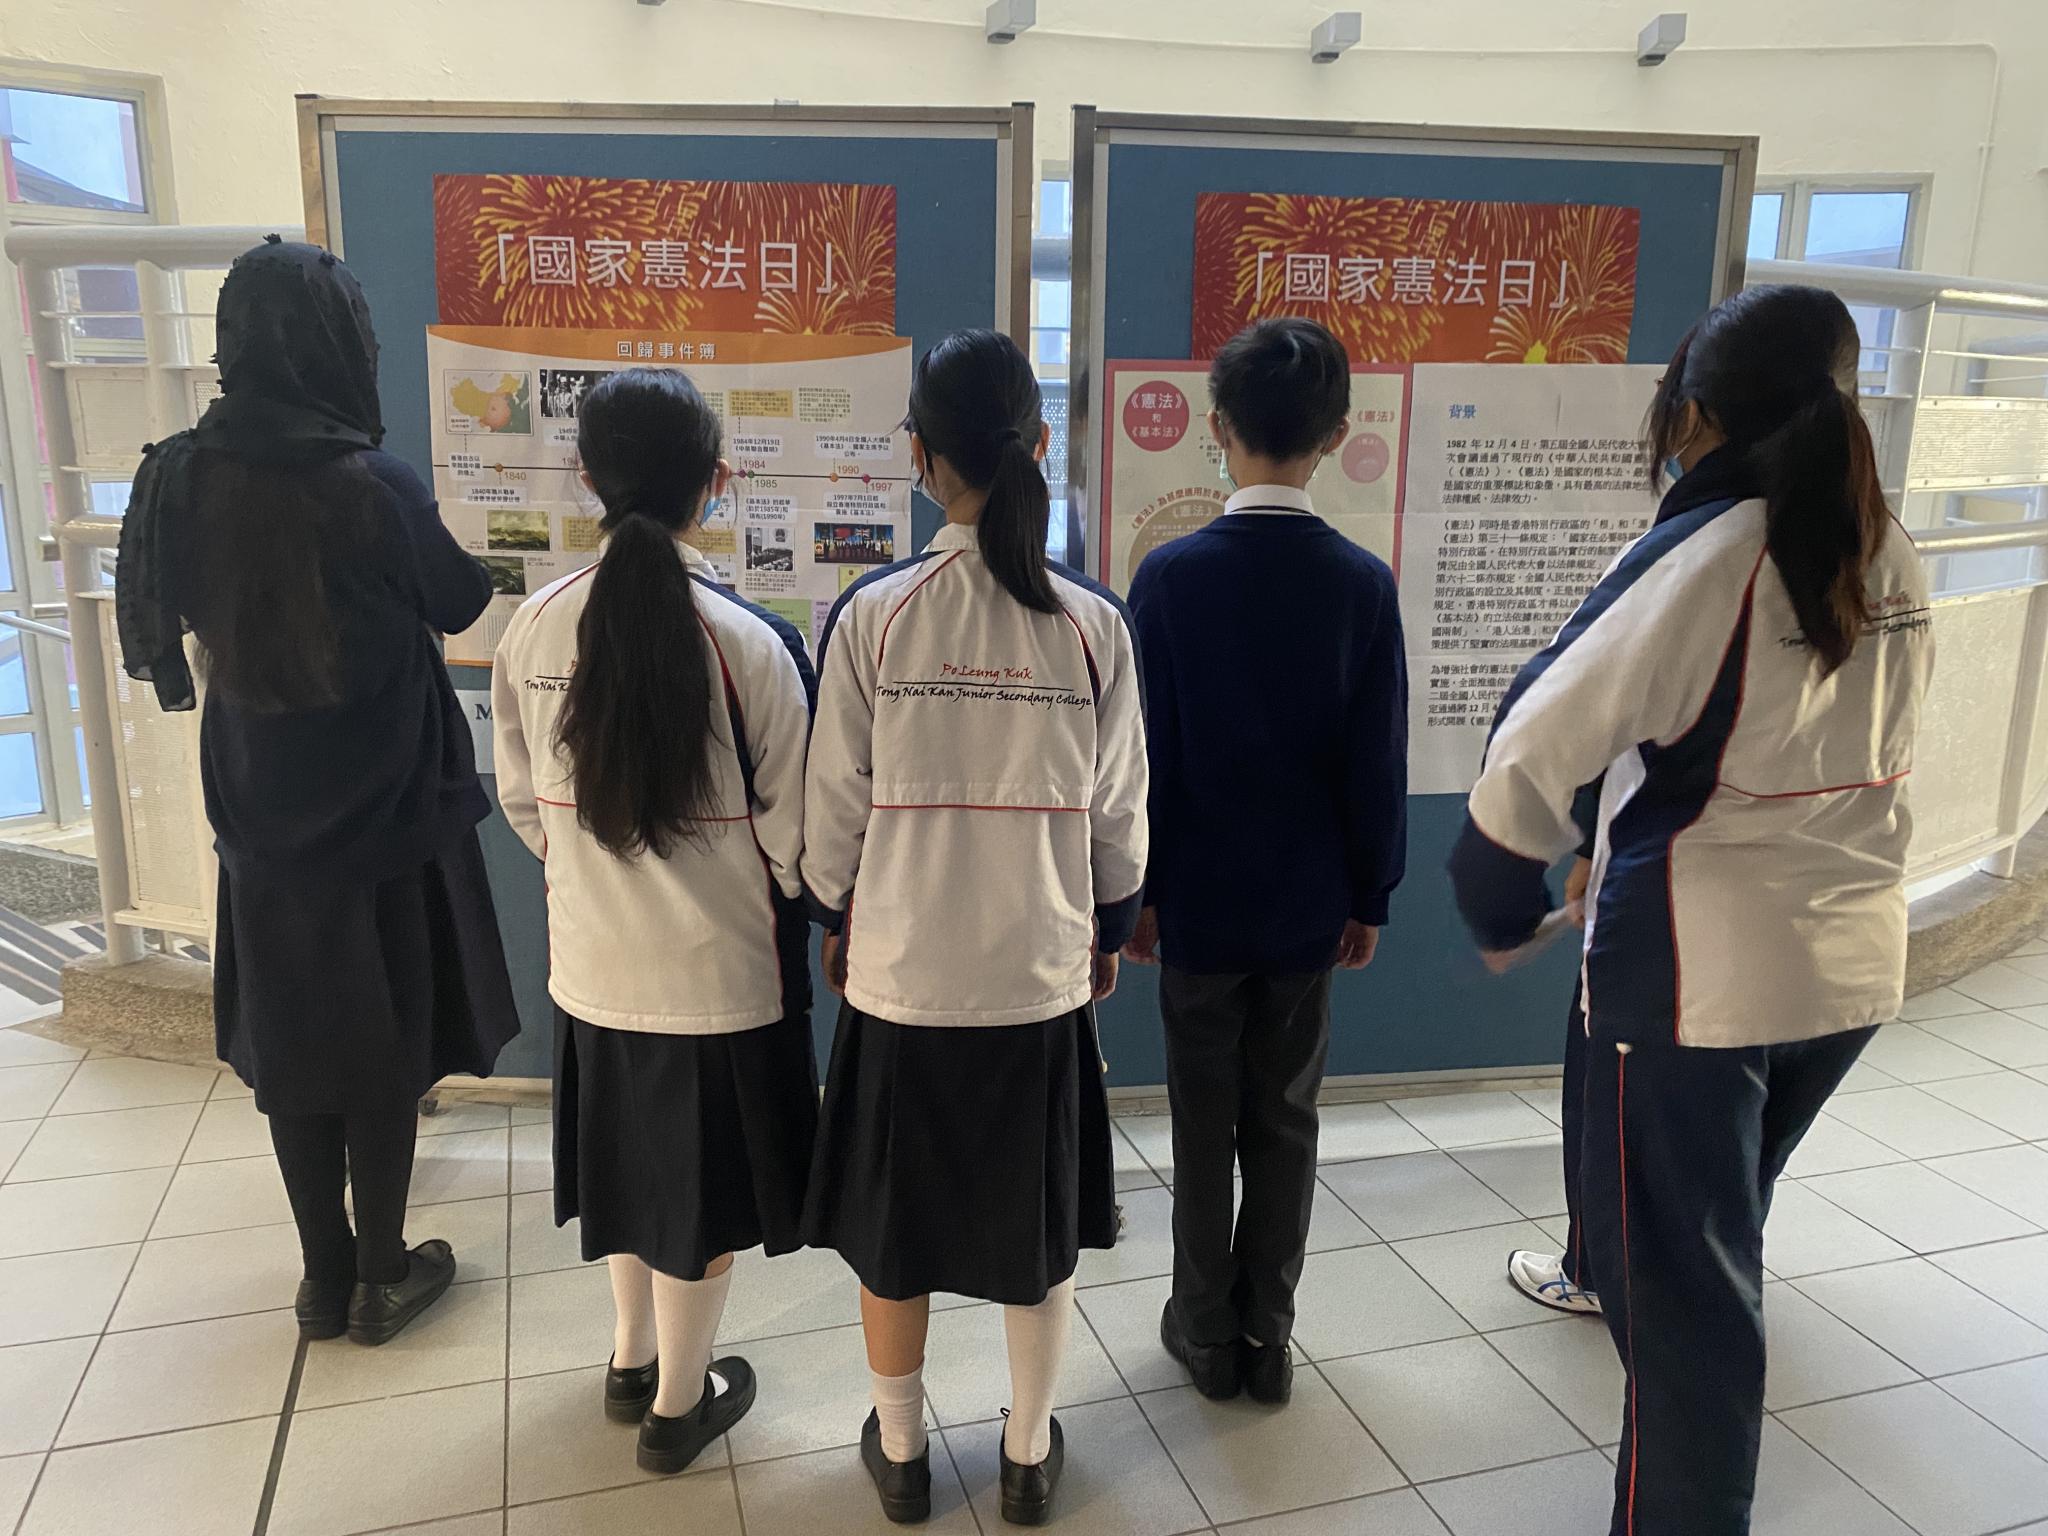 Students were reading the information on the exhibition board.